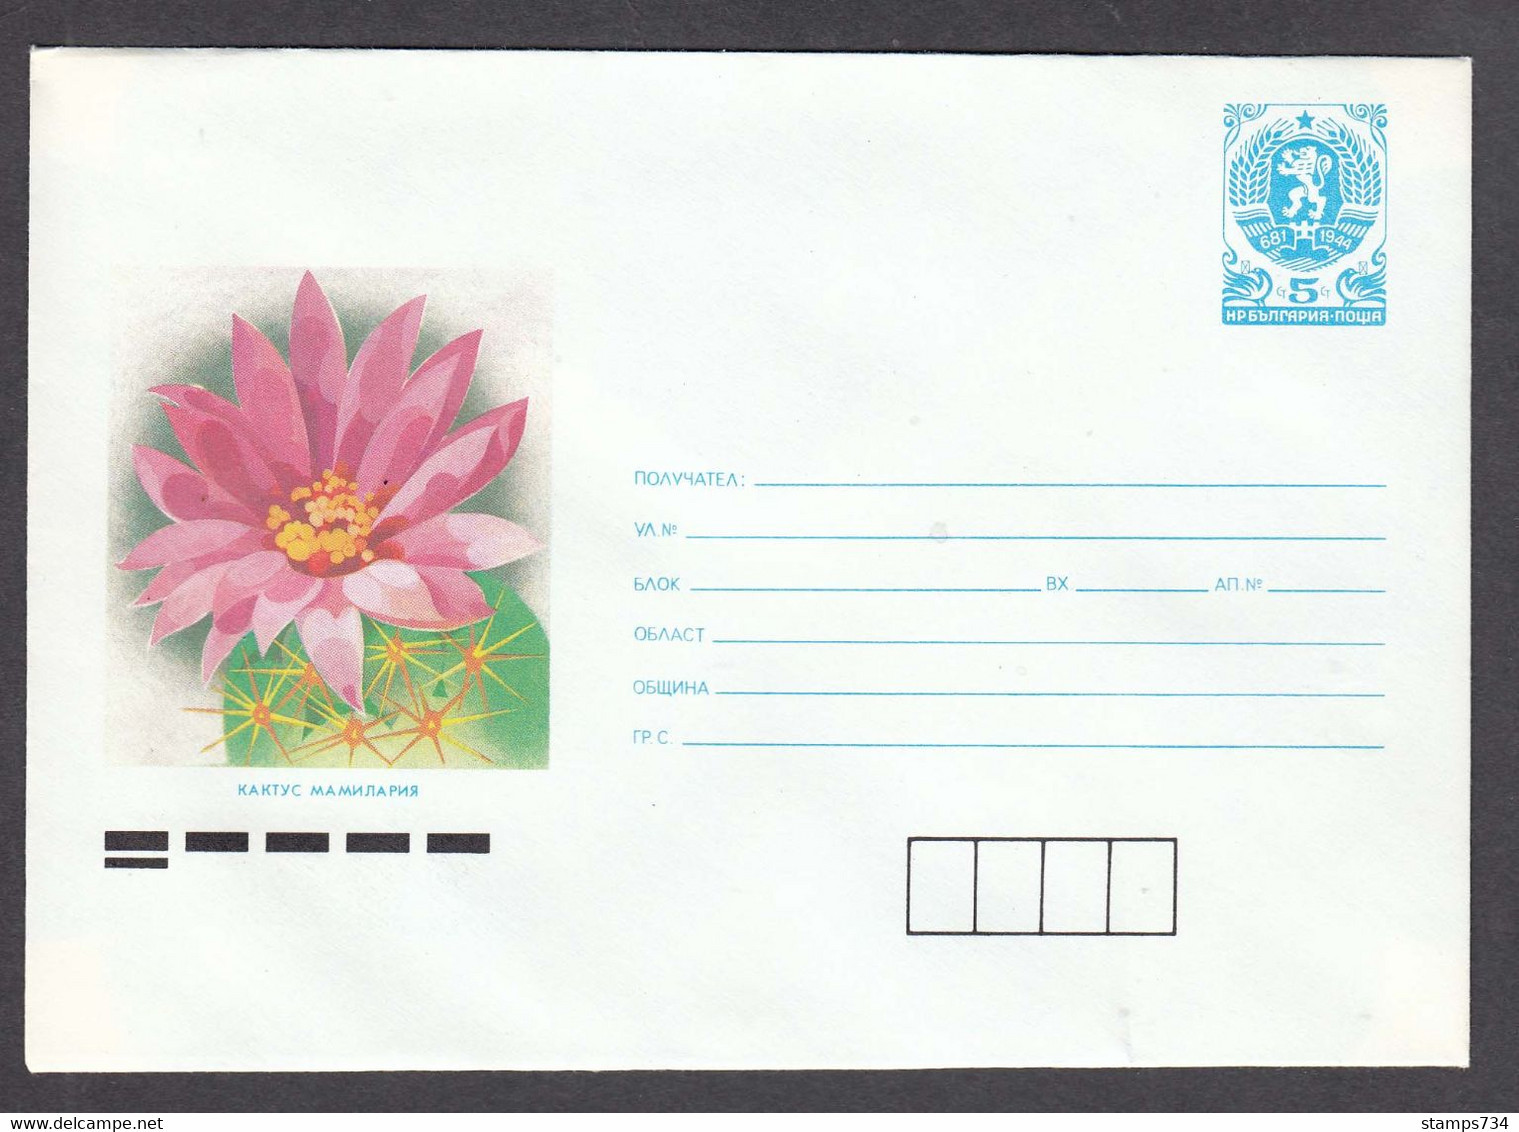 PS 959/1989 - Mint, Flower: Cactus Mamilaria, Post. Stationery - Bulgaria - Buste